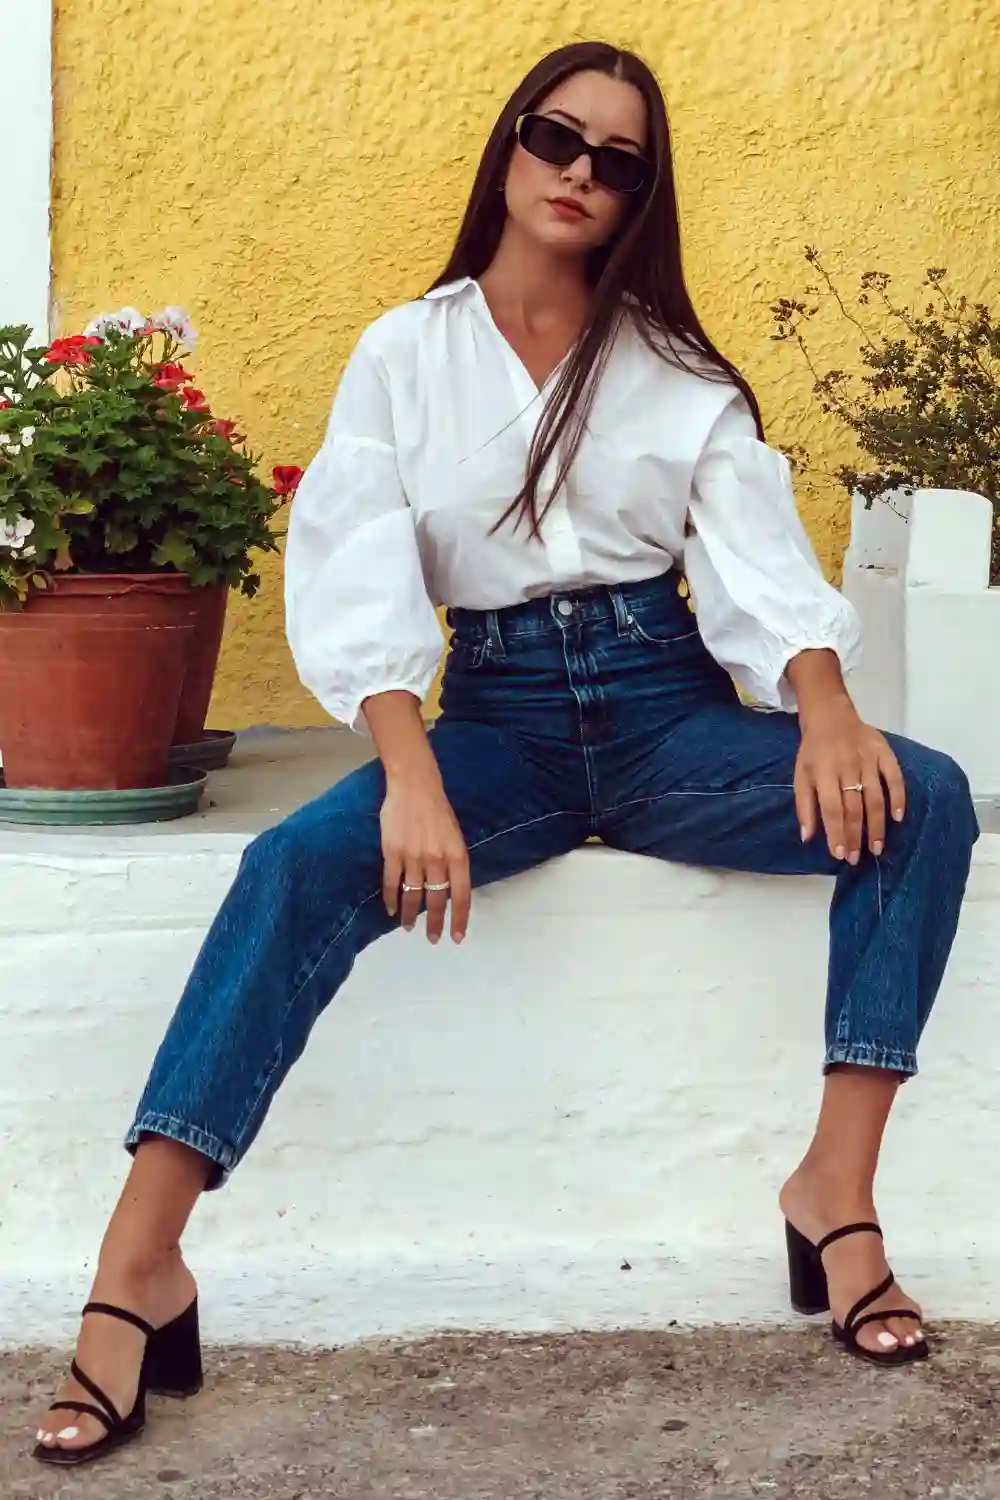 A Woman Wearing White Long Sleeves and Denim Jeans